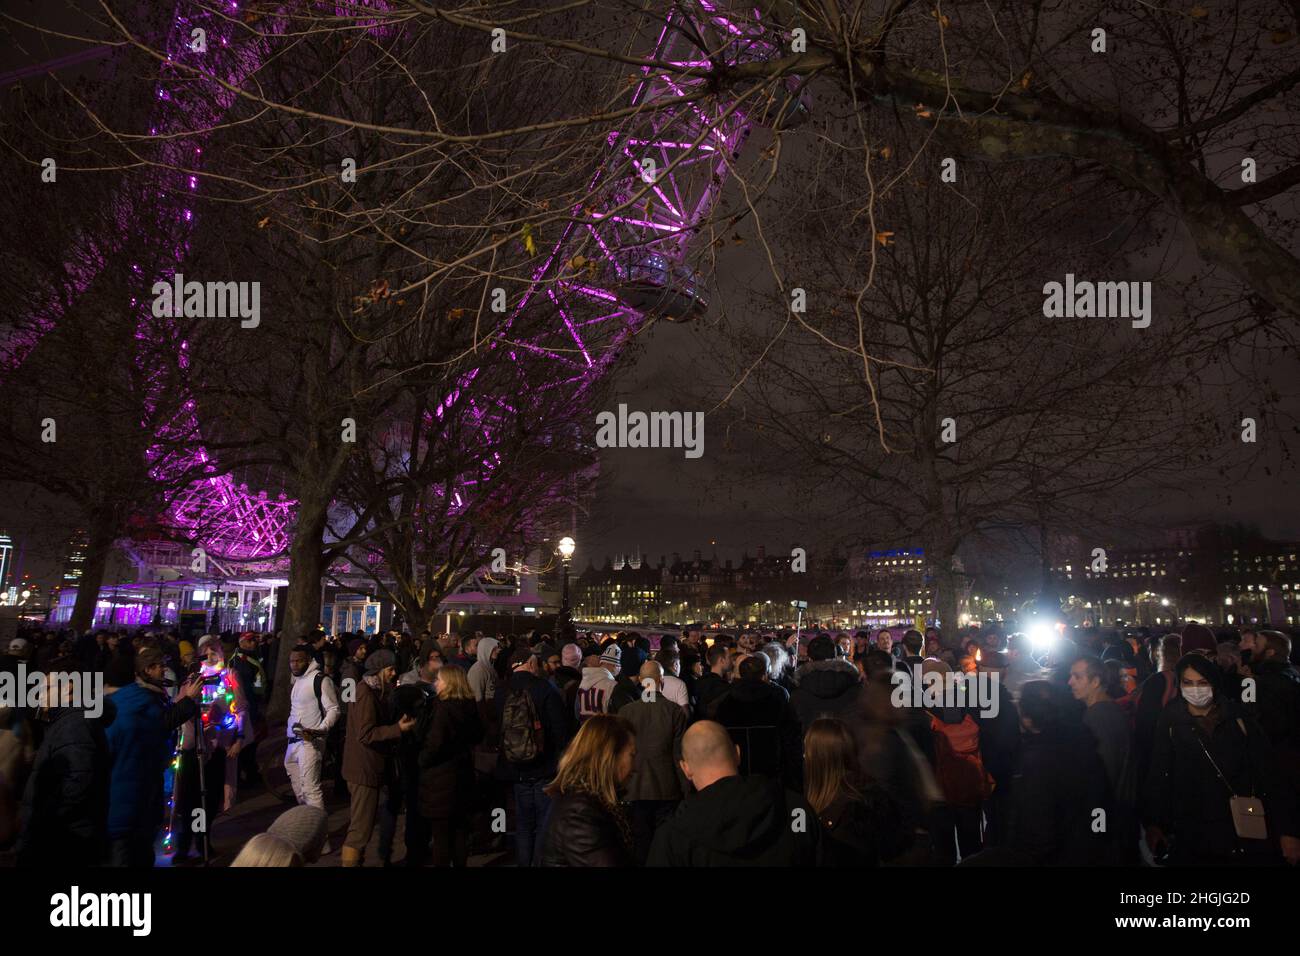 Participants gather for a freedom rally against Covid-related measures such as vaccine passports near London Eye in London on News Year’s Eve. Stock Photo